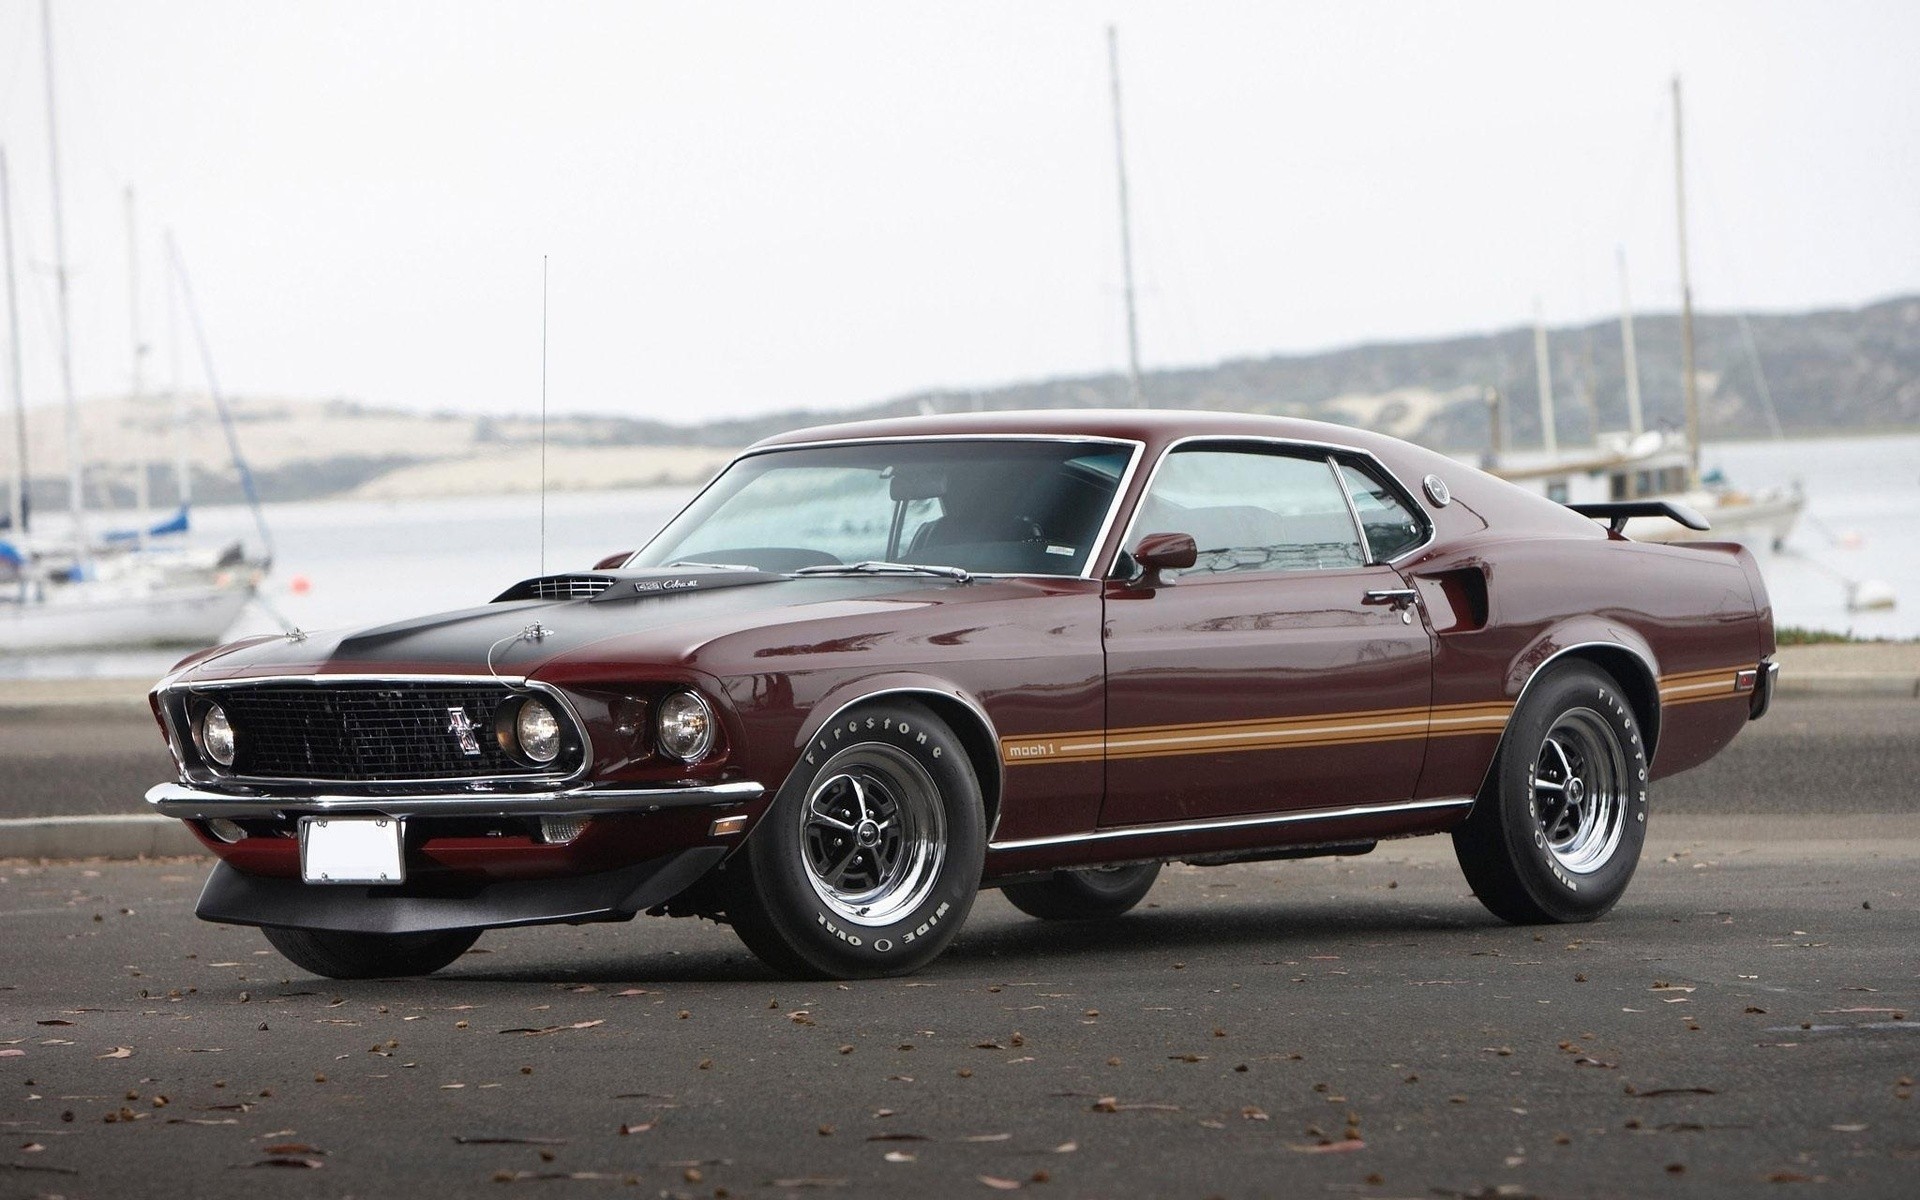 1920x1200 11 Ford Mustang Mach 1 HD Wallpapers | Backgrounds - Wallpaper Abyss